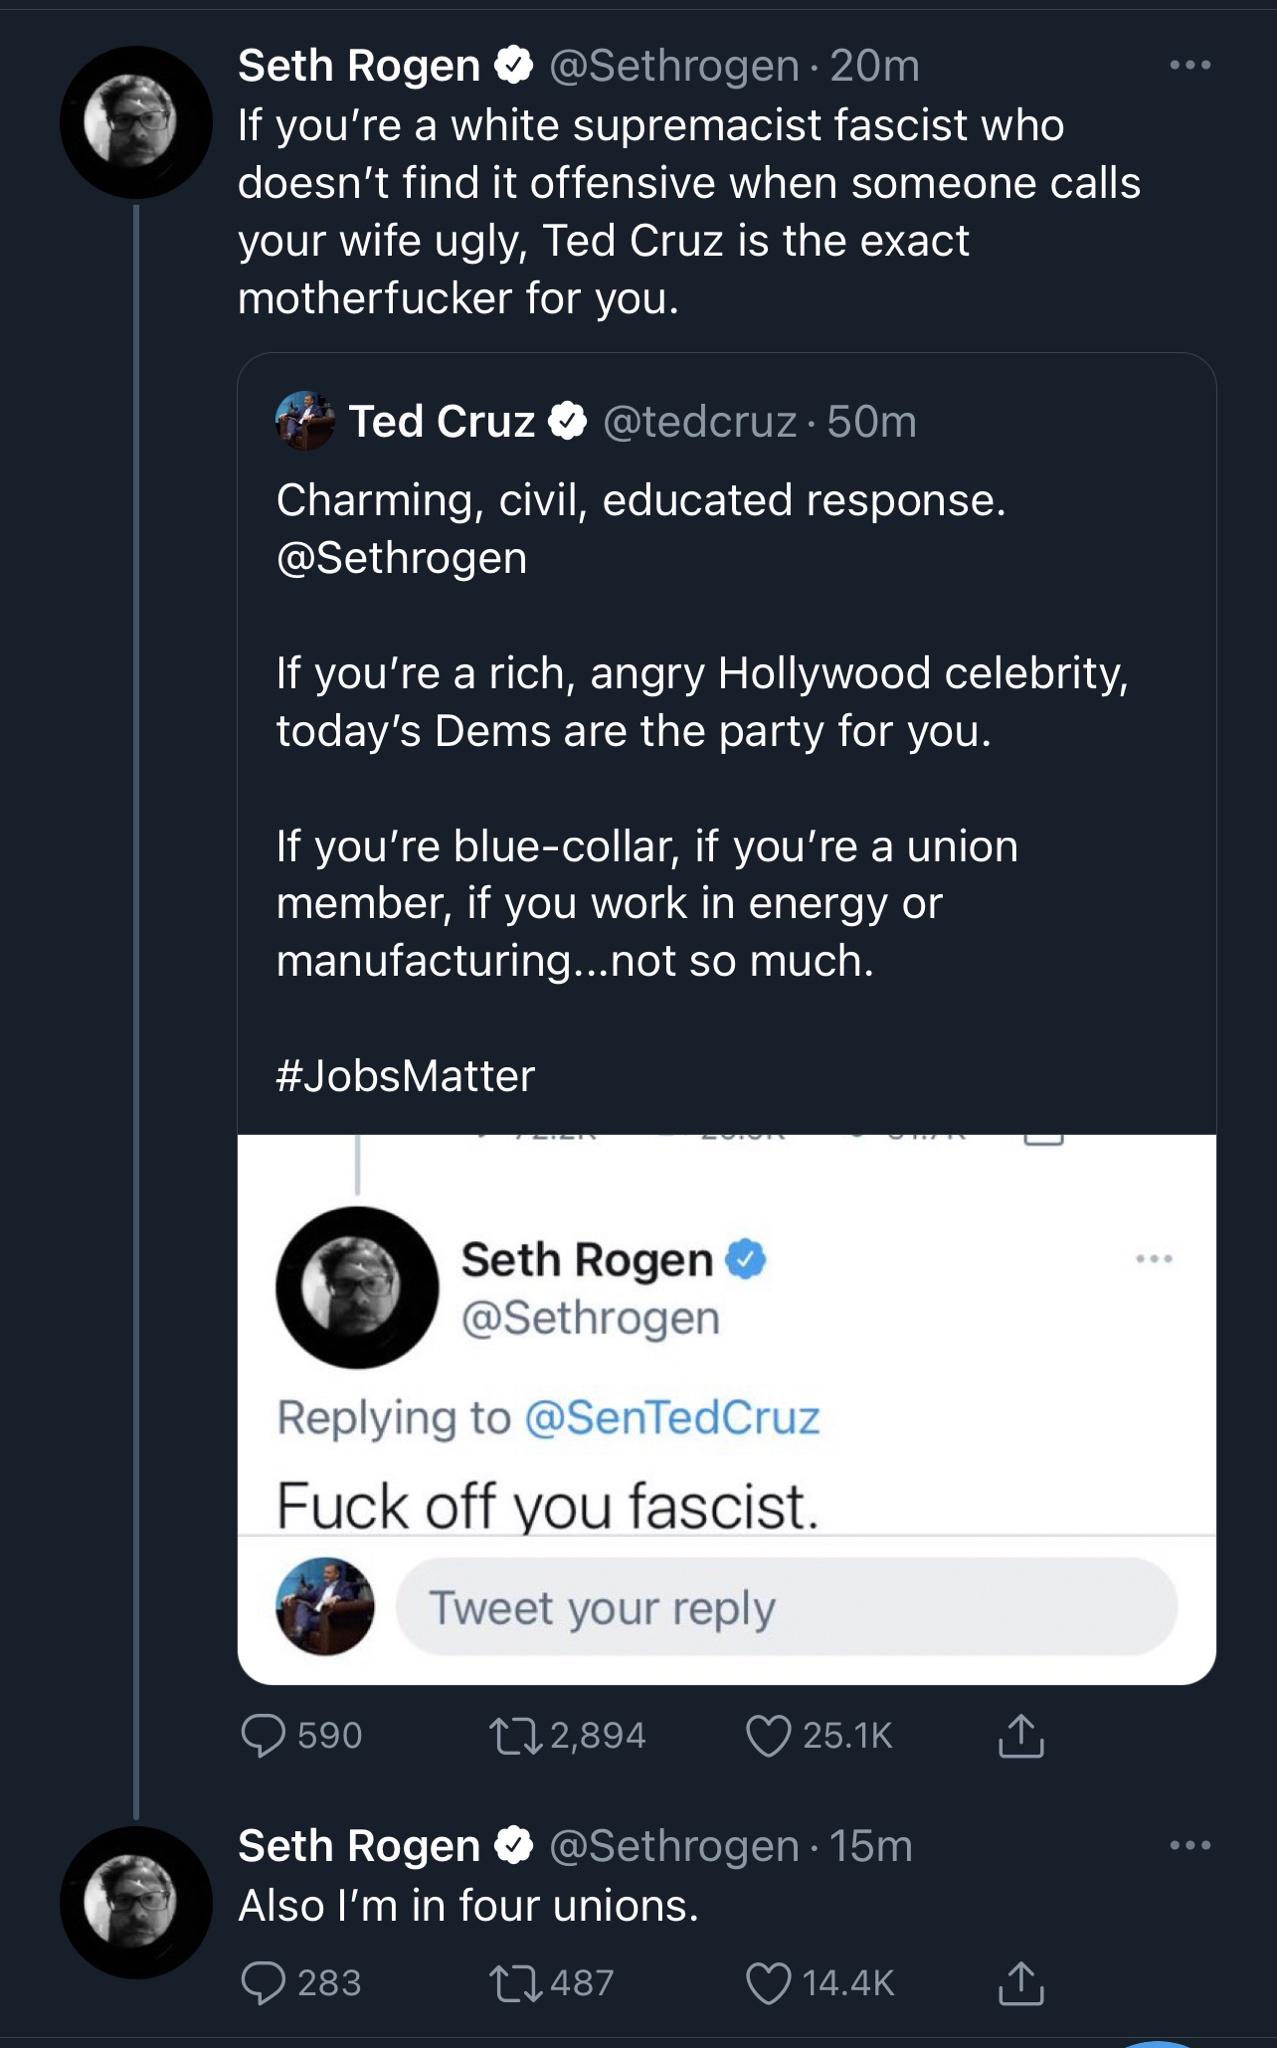 funny pics - Seth Rogen If you're a white supremacist fascist who doesn't find it offensive when someone calls your wife ugly, Ted Cruz is the exact motherfucker for you.  - Ted Cruz . Charming, civil, educated response. If you're a rich, angry Hollywood